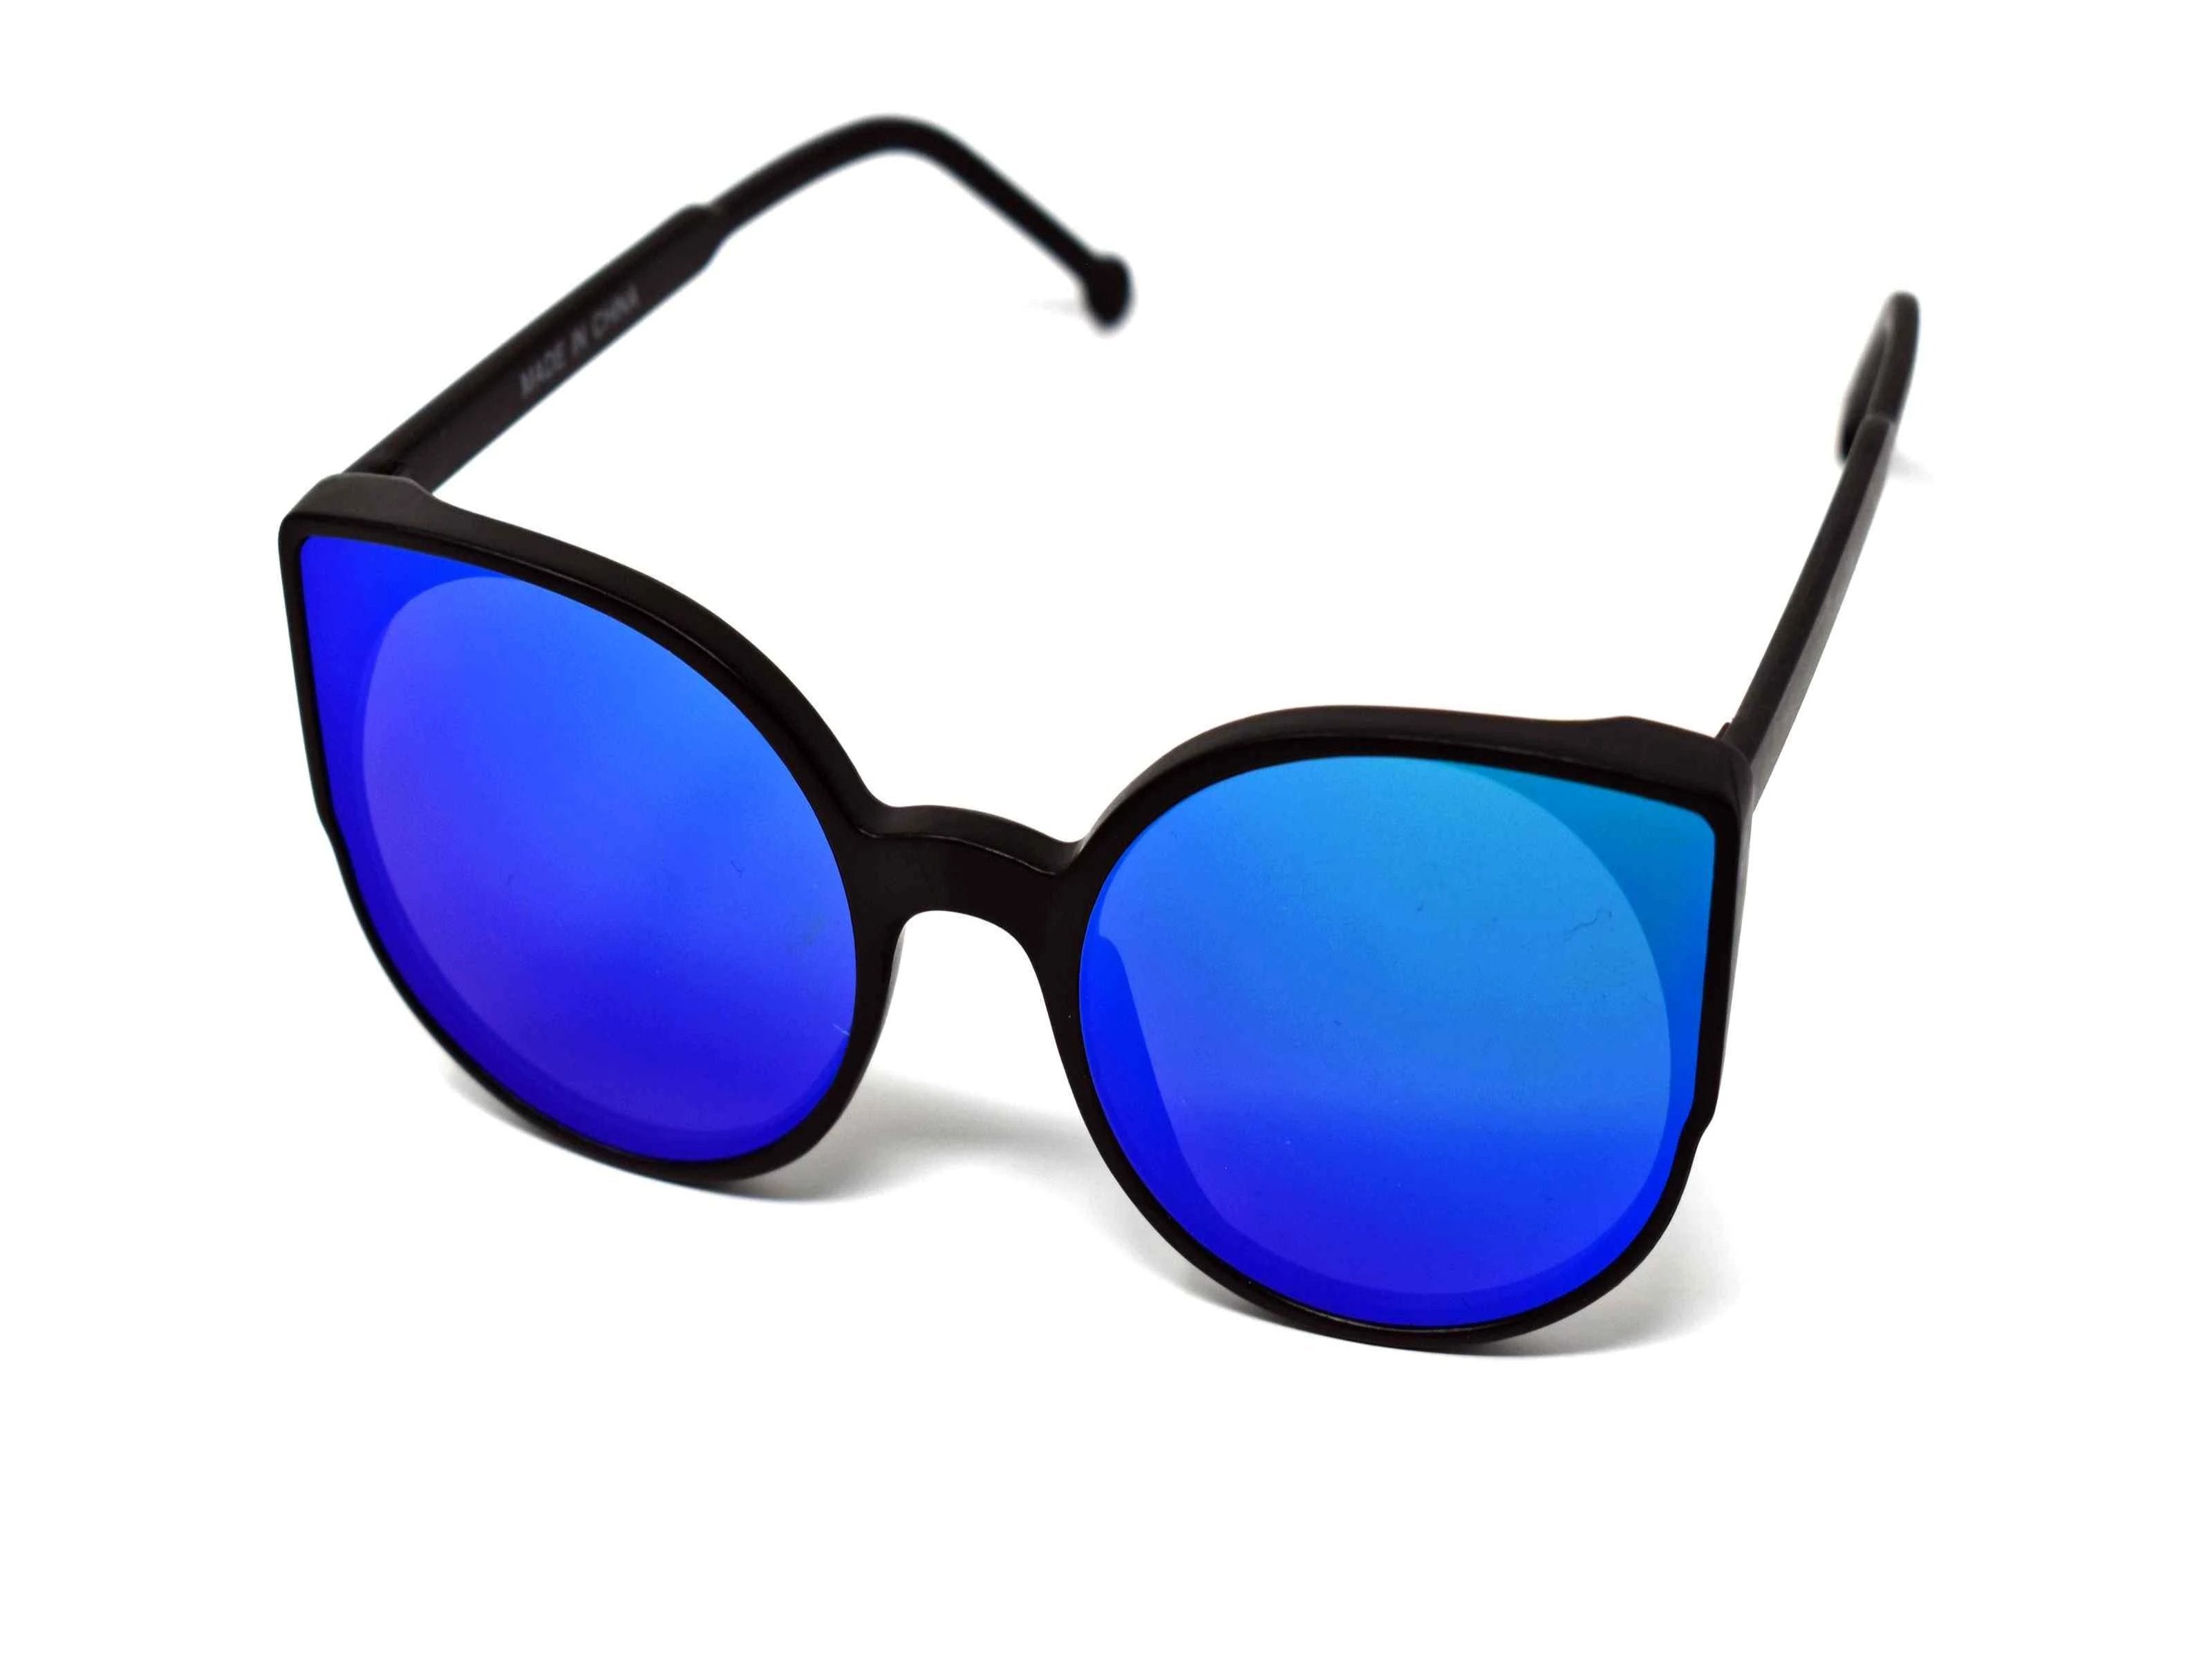 Say hello to our stylish Tansy black framed sunglasses with aqua blue mirrored lens and a cat eye shape. 